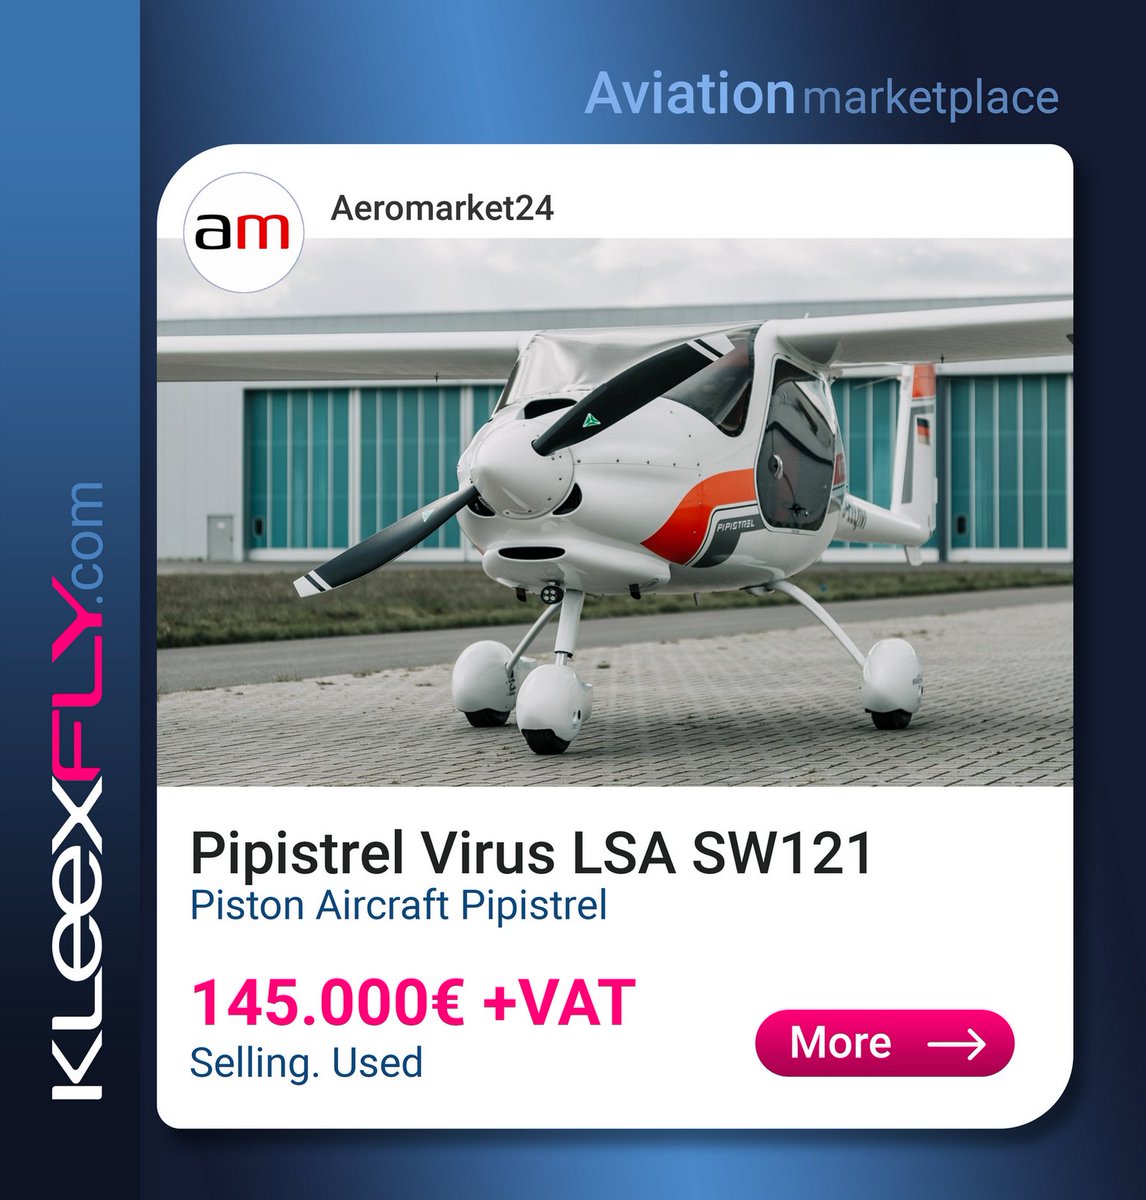 PIPISTREL VIRUS LSA SW121. For sale.
kleexfly.com/wp/ad/?ad_id=1…

#PIPISTREL #VIRUS #Aeromarket24 #Aircraft #Helicopters #Gliders #Schools #Jobs #Drones #Skydiving #Paragliding #Speedflying #Kiting